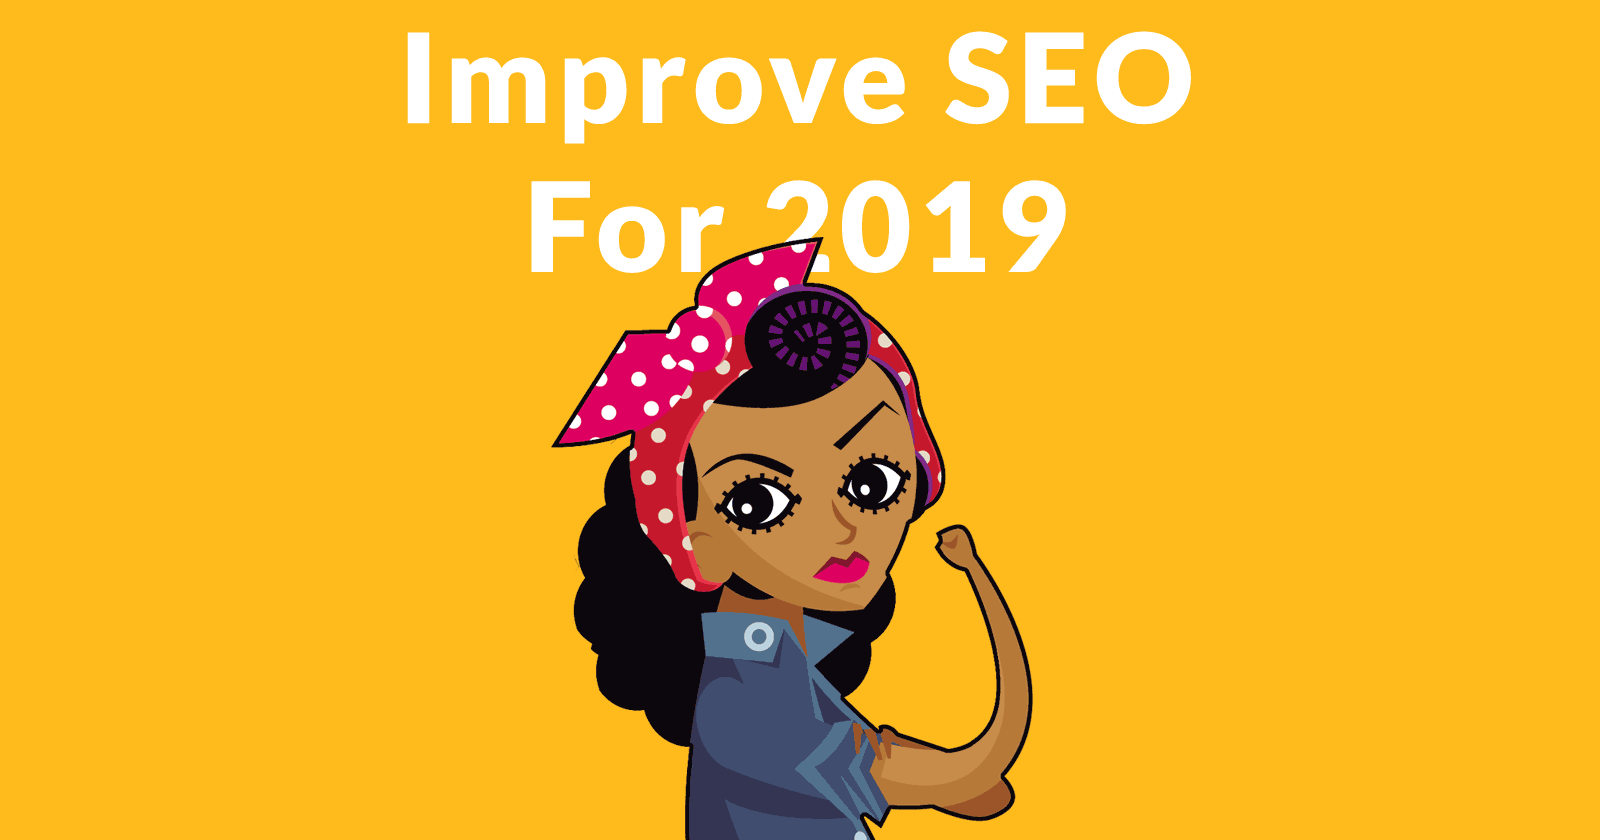 Image of a Yes We Can poster girl symbolizing the can do spirit for improving seo in 019